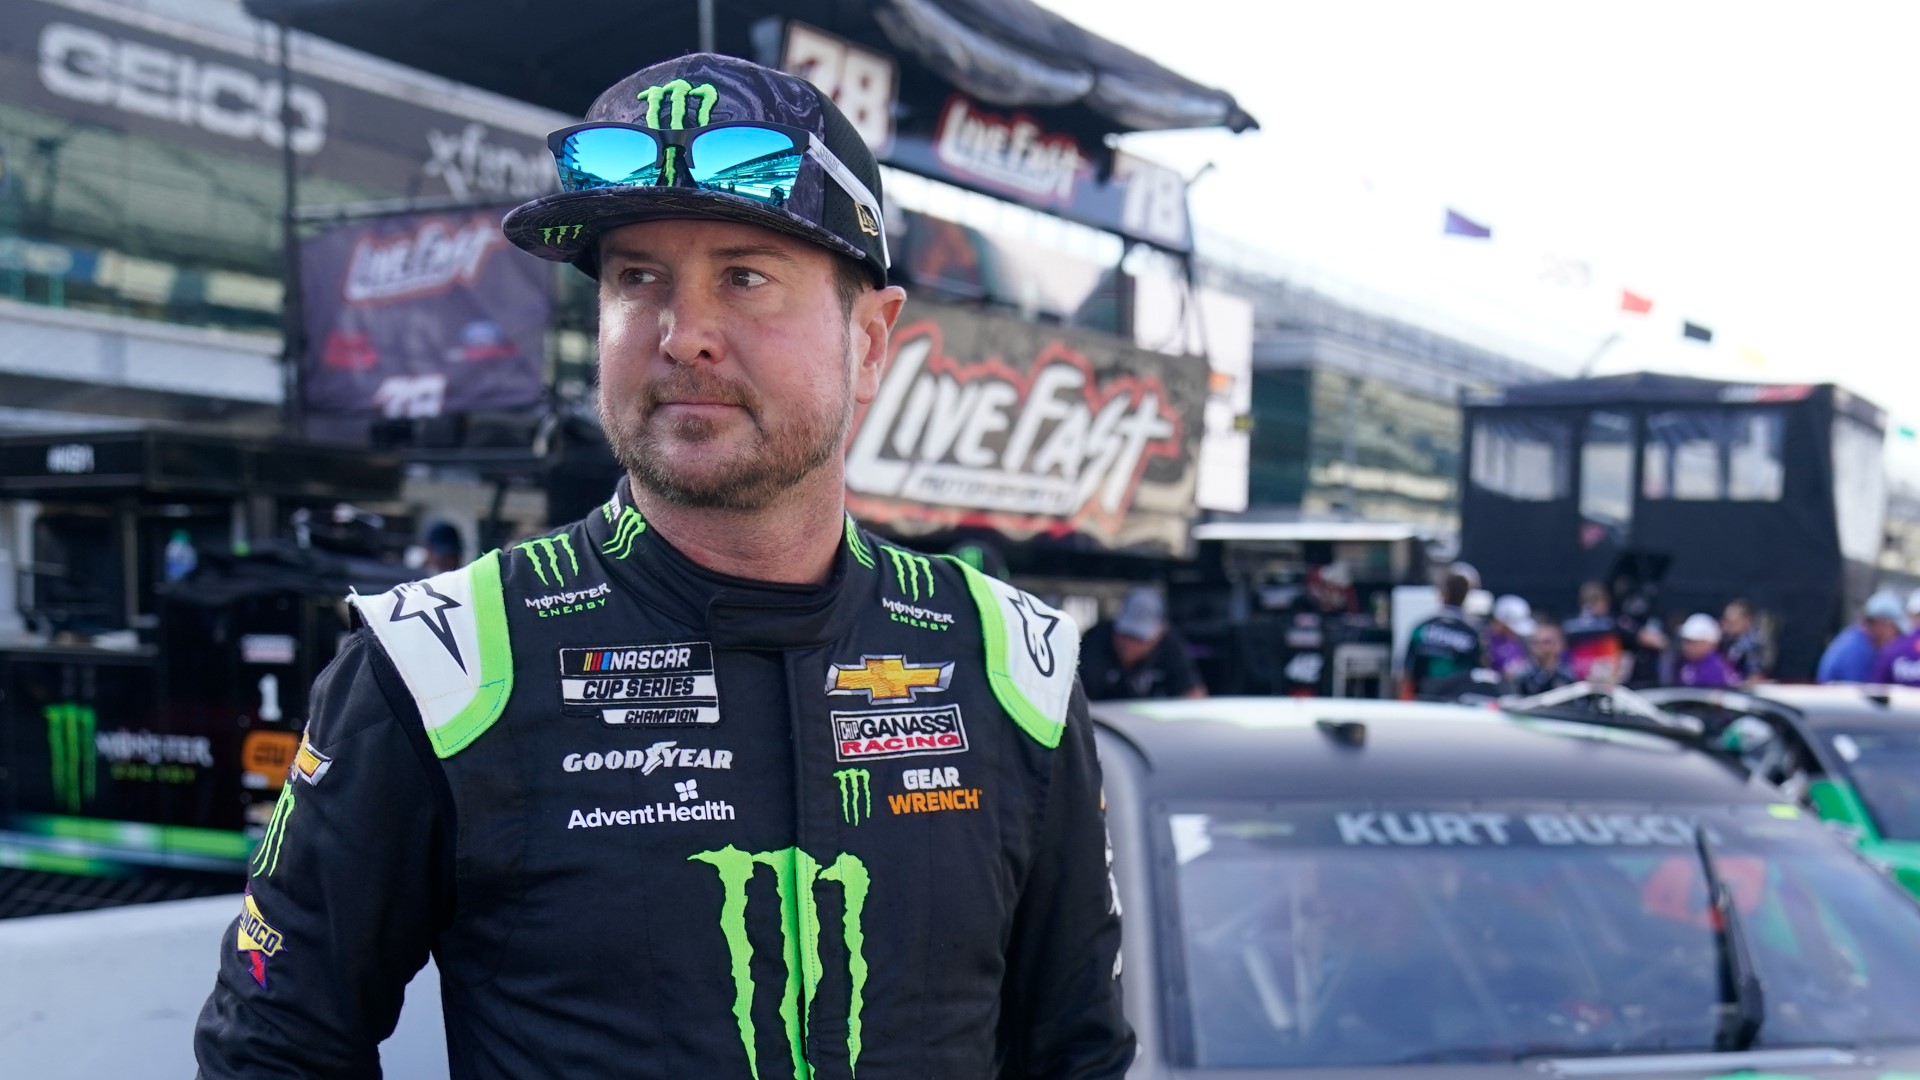 Kurt Busch announced over the weekend that he will not compete full-time in 2023.